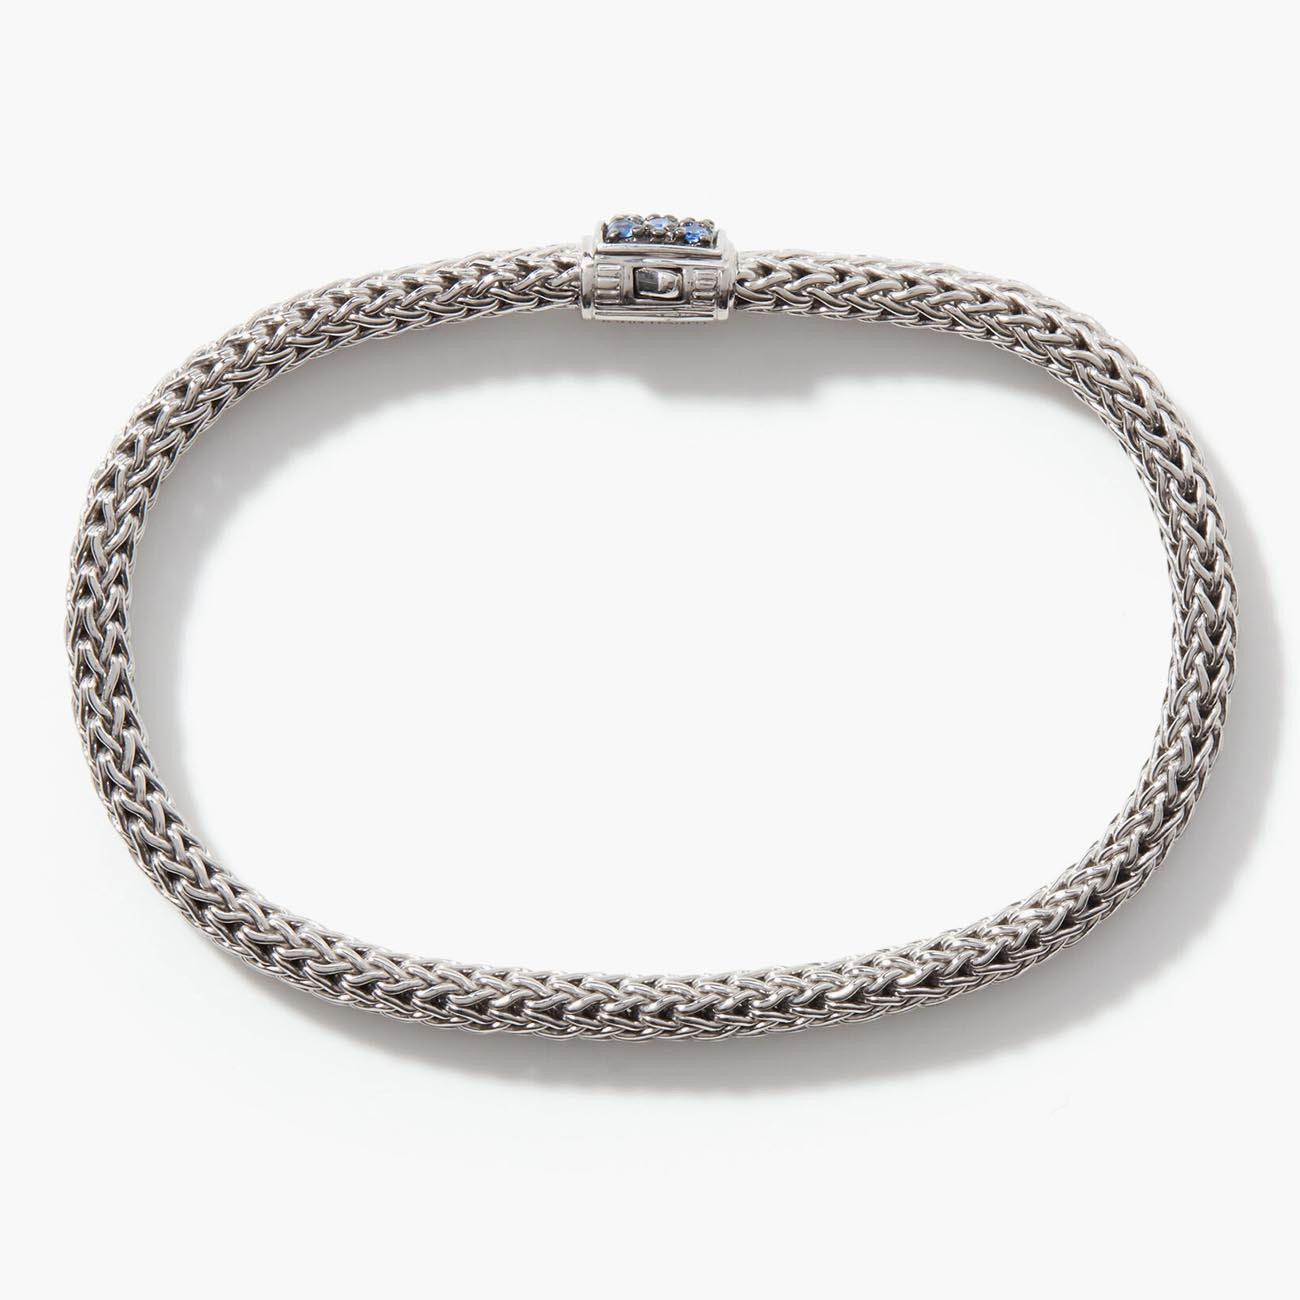 John Hardy Classic Chain 5mm Silver Bracelet with Blue Sapphire Clasp Profile